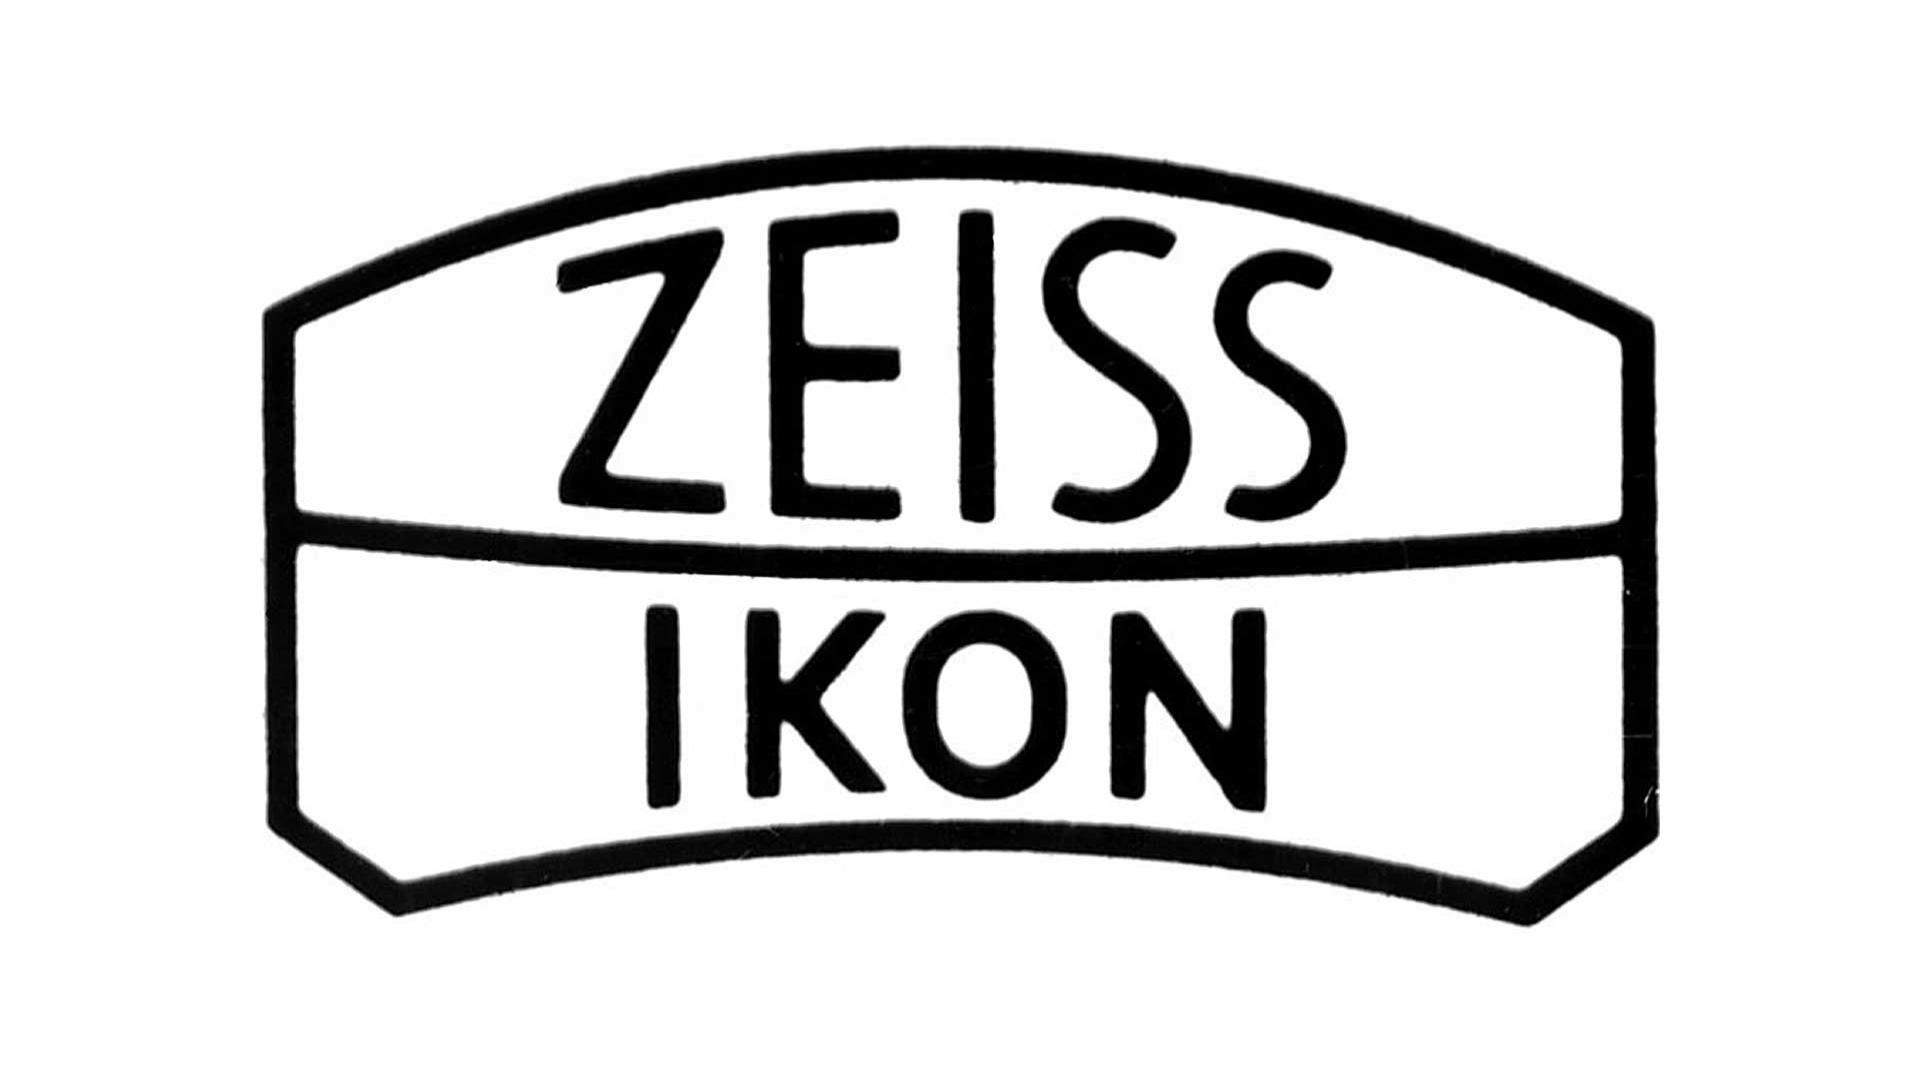 The logo of Zeiss Ikon.